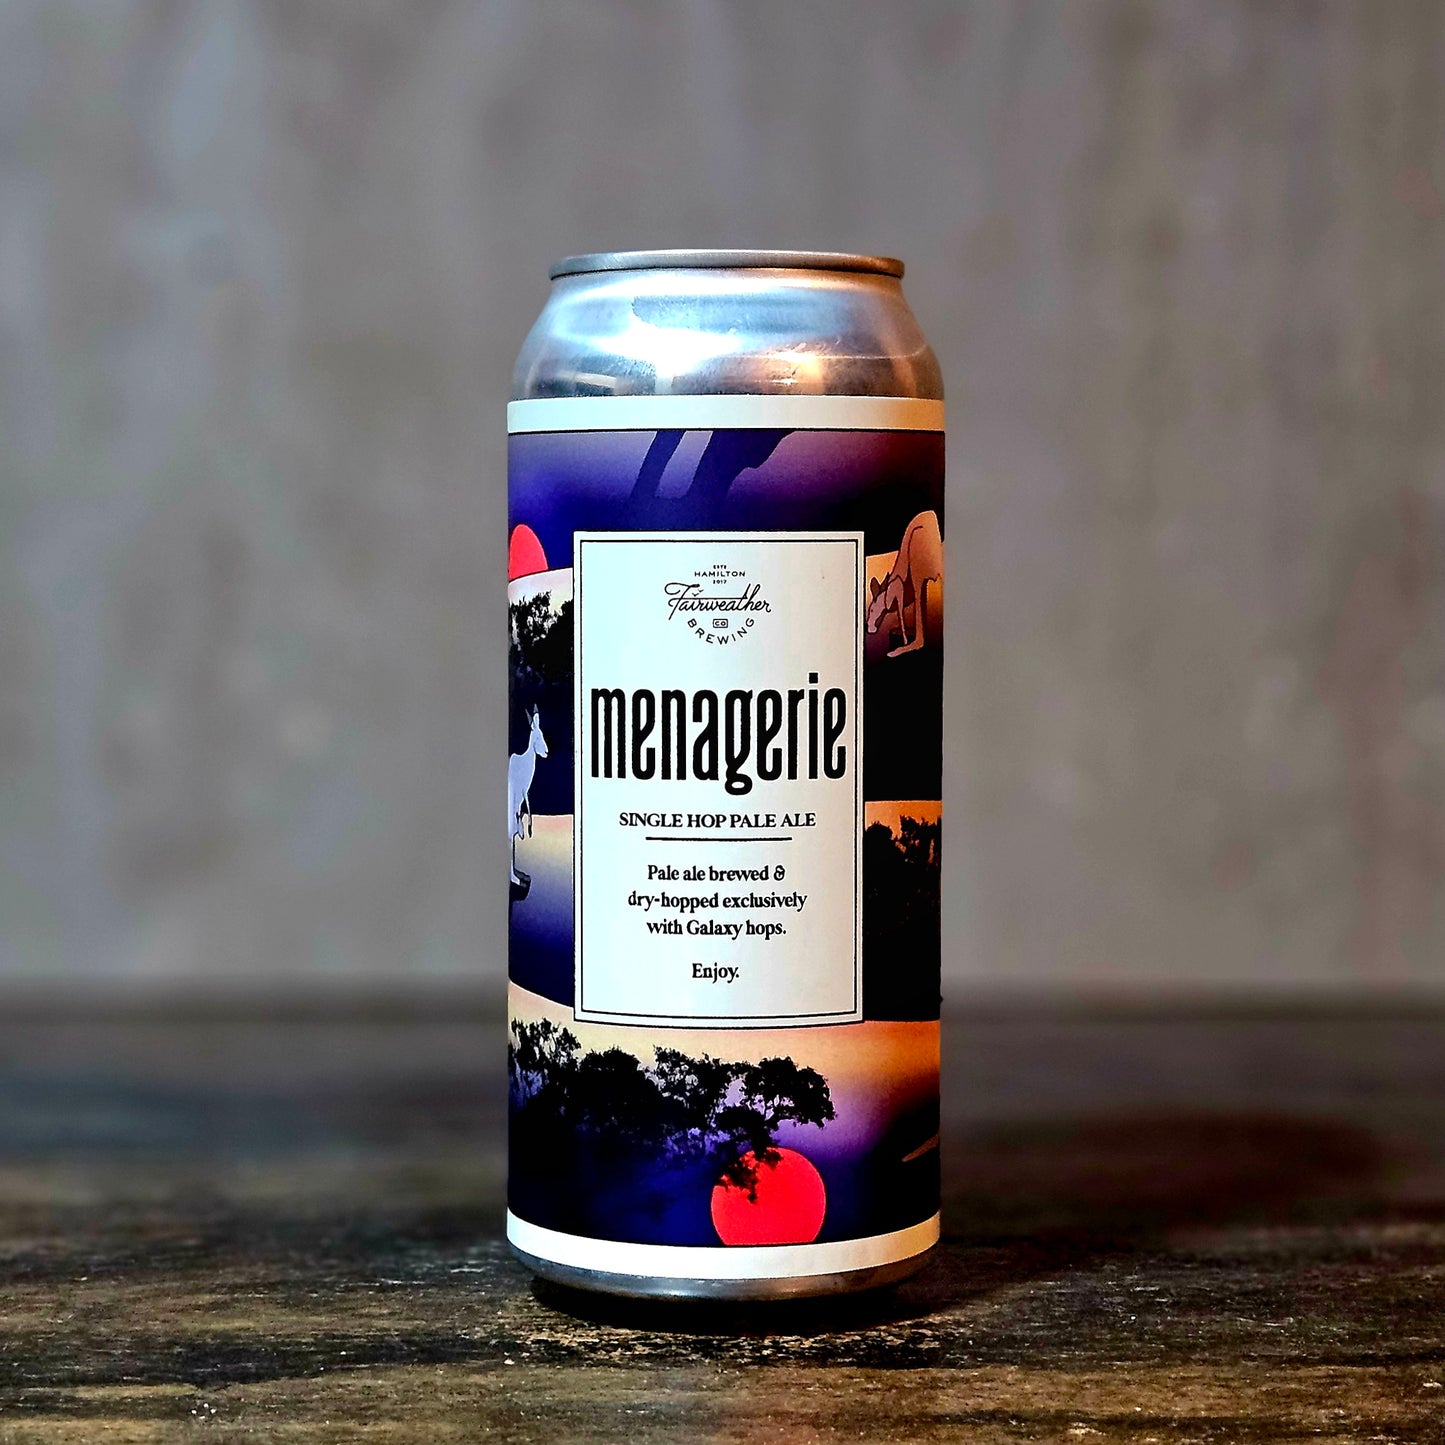 Fairweather "Menagerie" Dry-Hopped Pale Ale